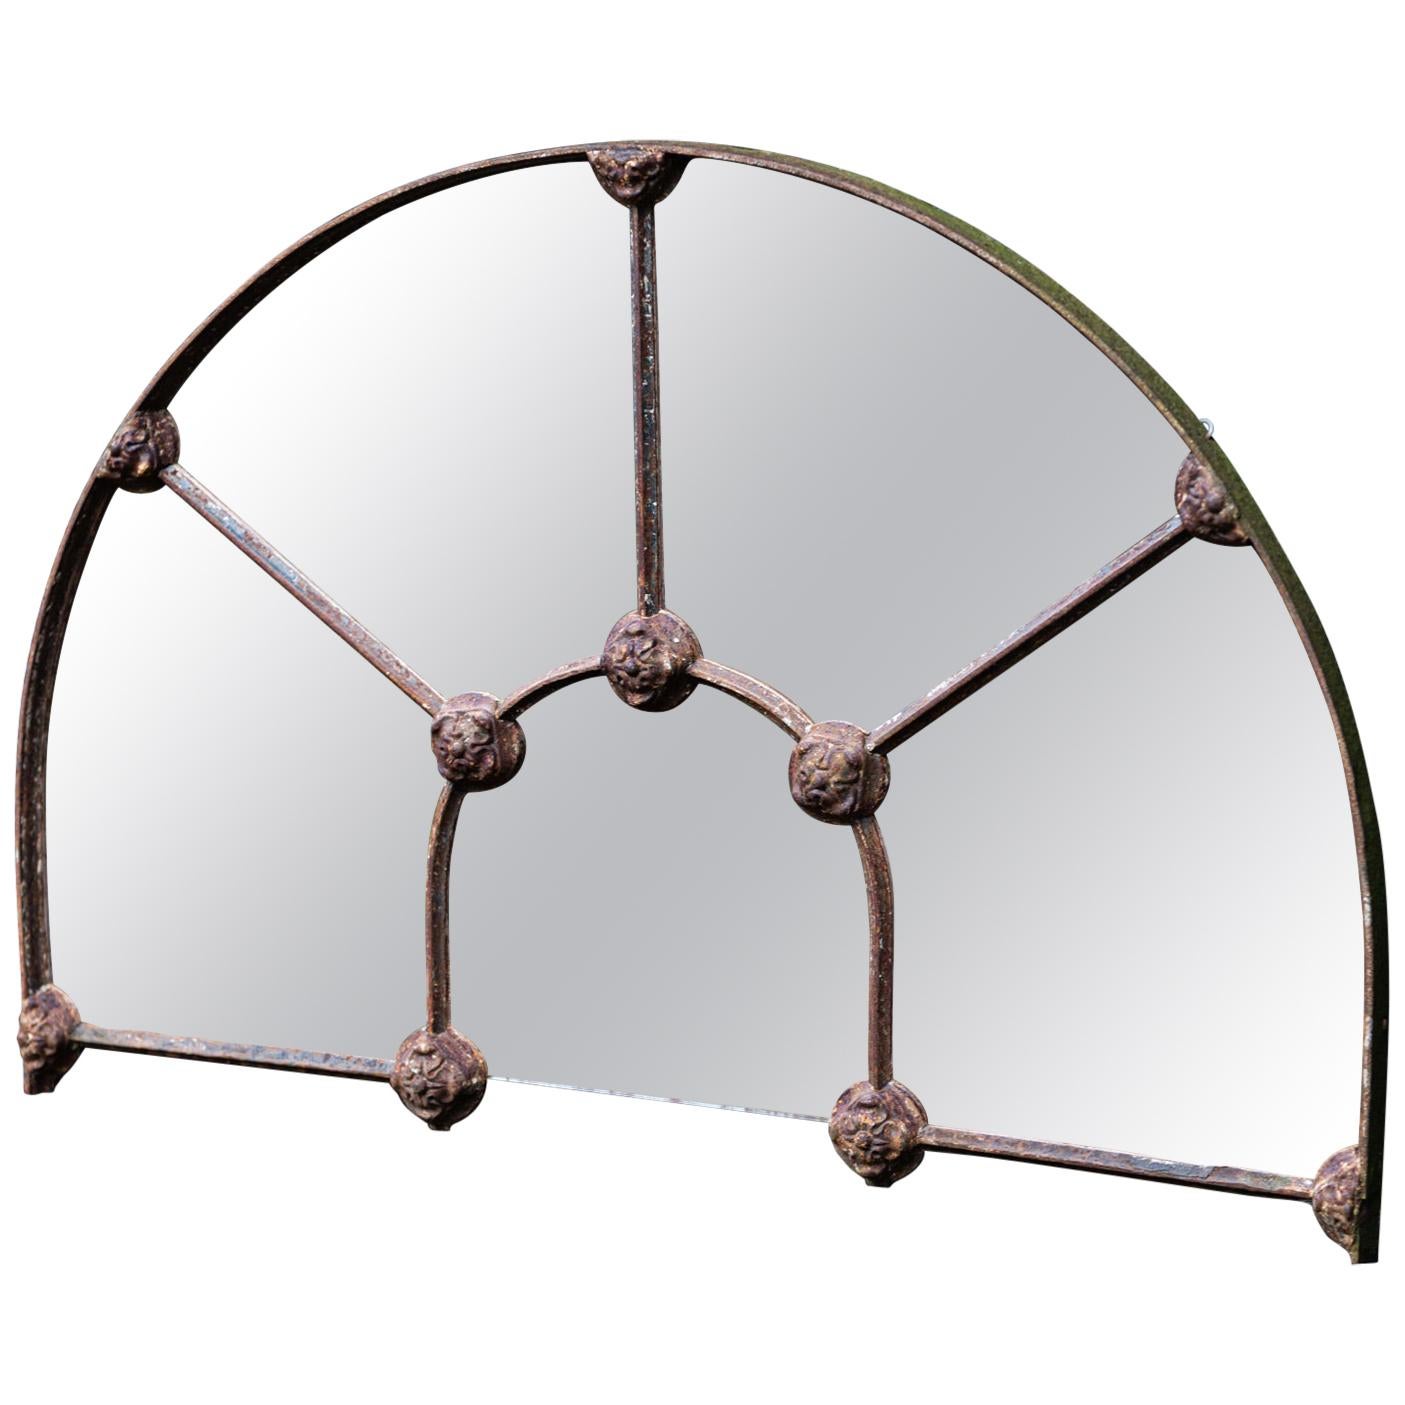 Arched Cast Iron Reclaimed Window Mirror, Mid-19th Century For Sale